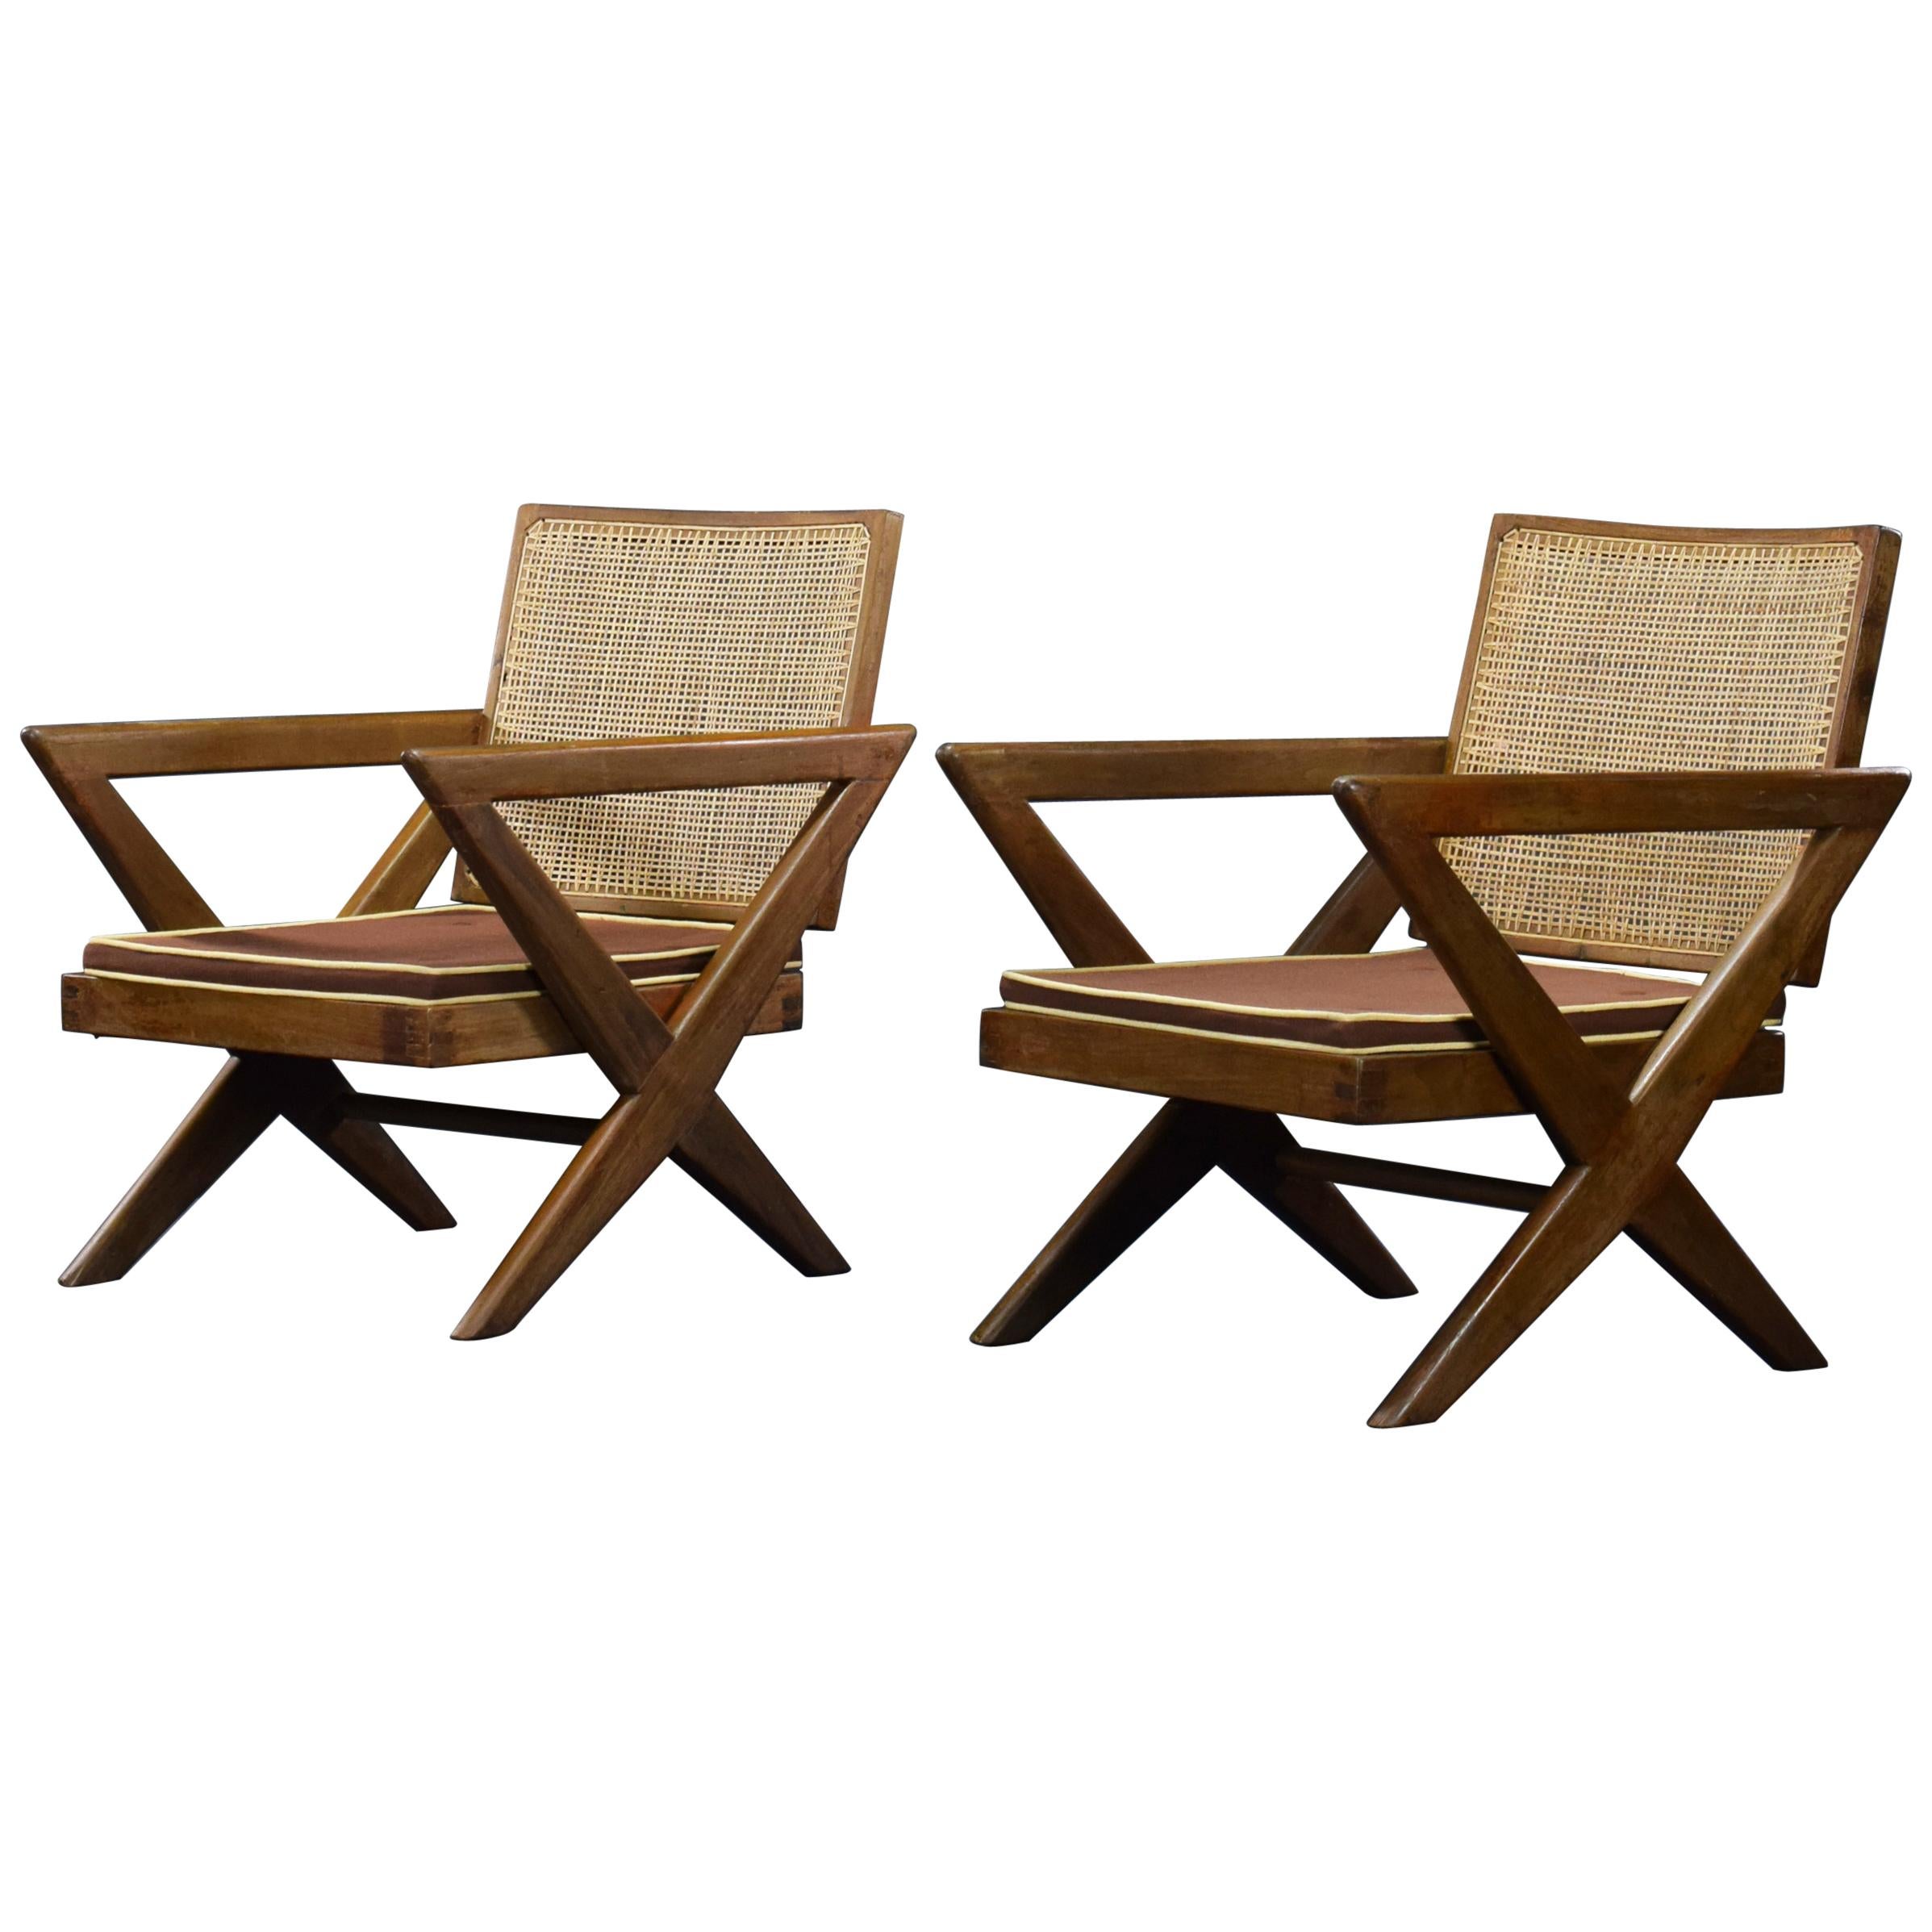 Pierre Jeanneret Pair of X-Leg Chairs  PJ-SI-45-A / Authentic Midcentury